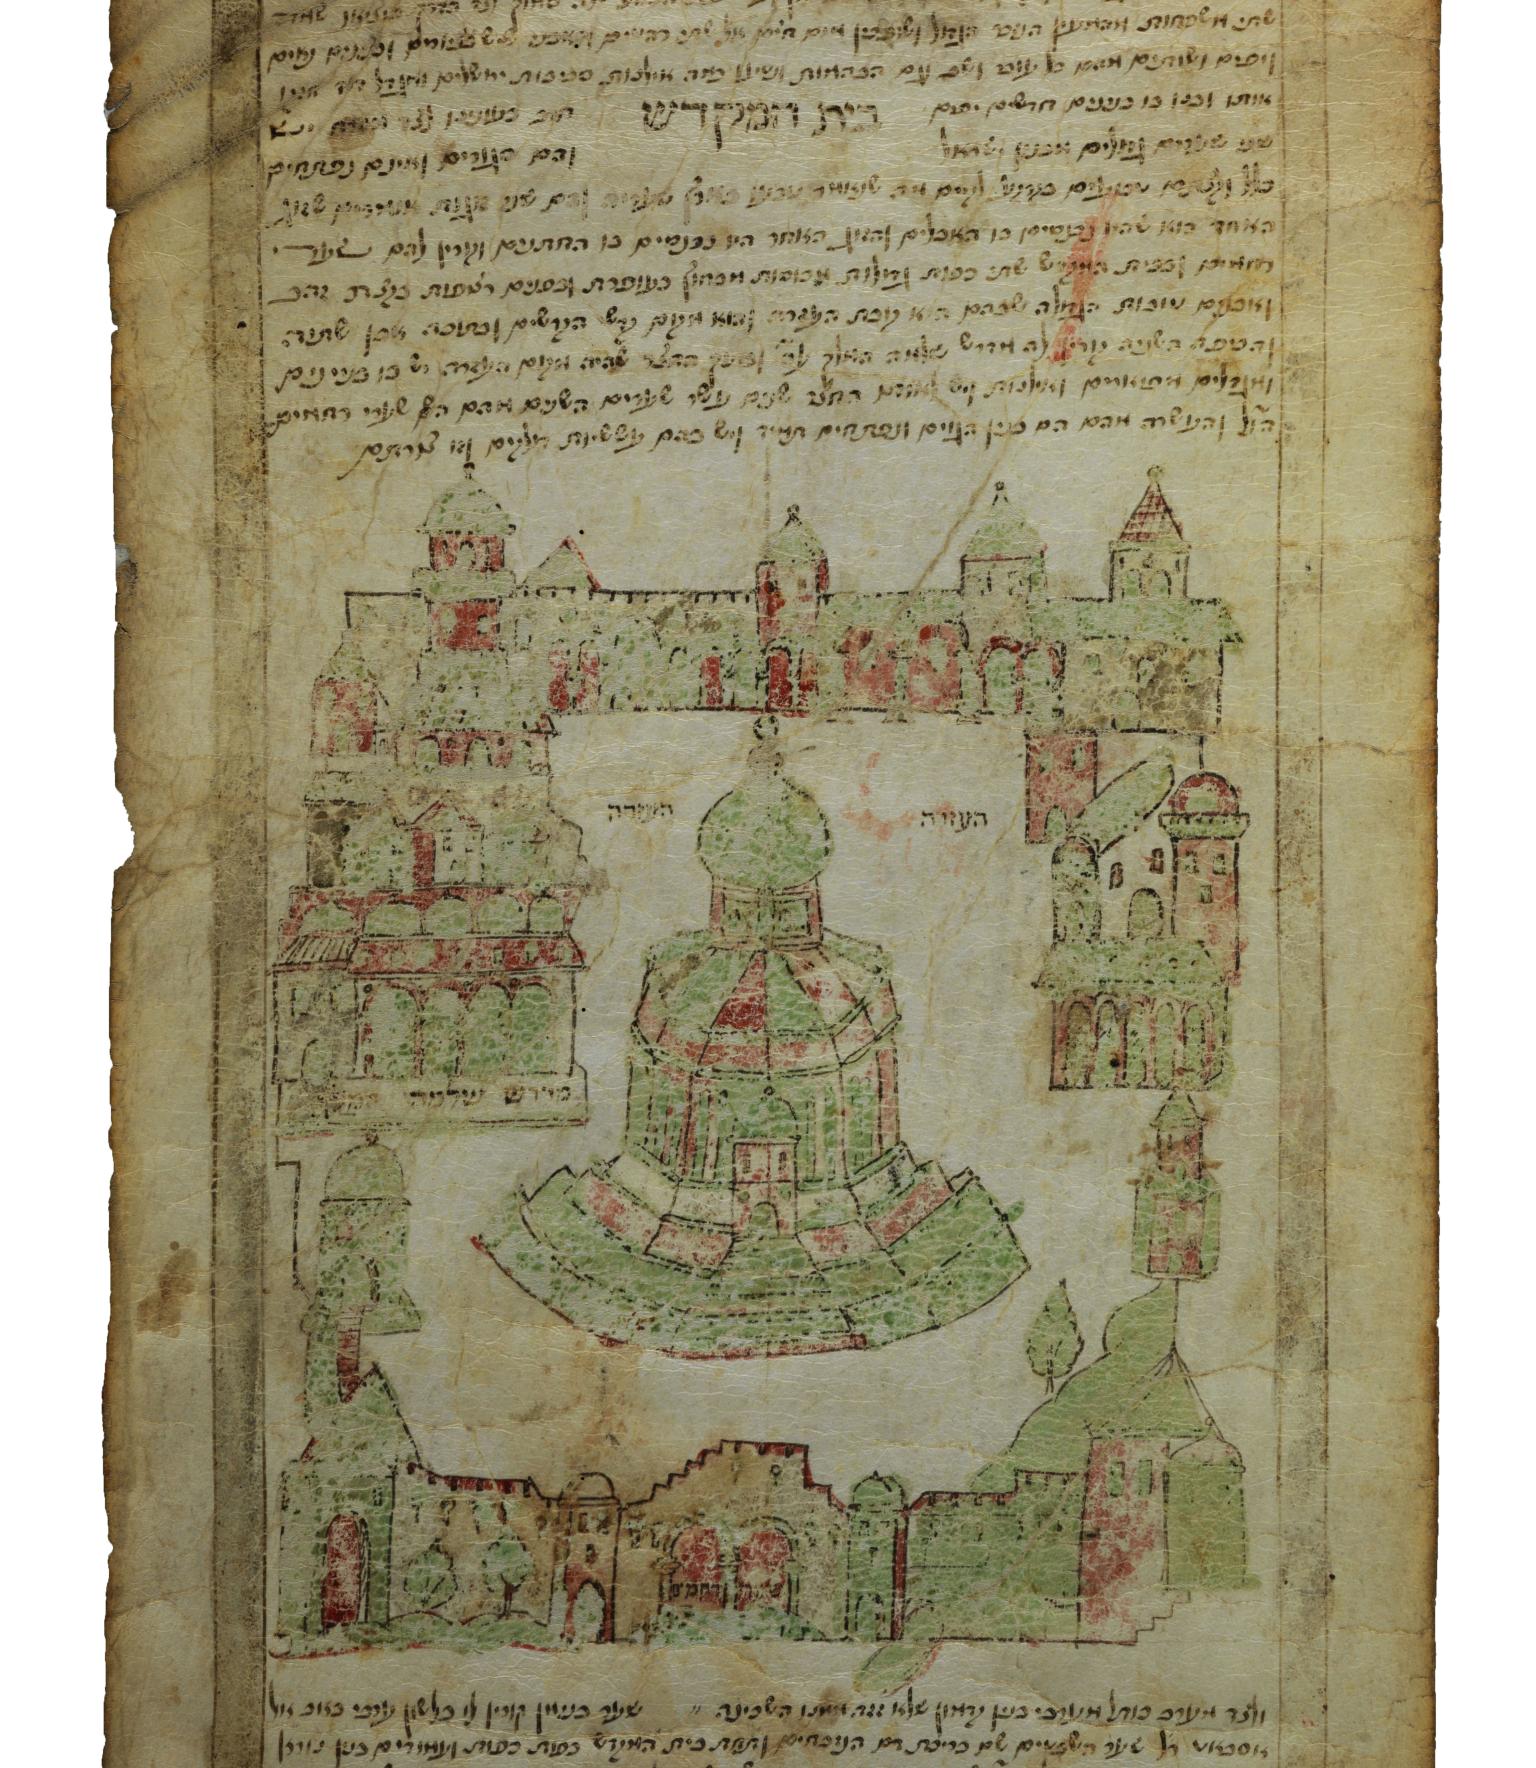 Manuscript page with Hebrew text above illustration of city walls with central domed building.